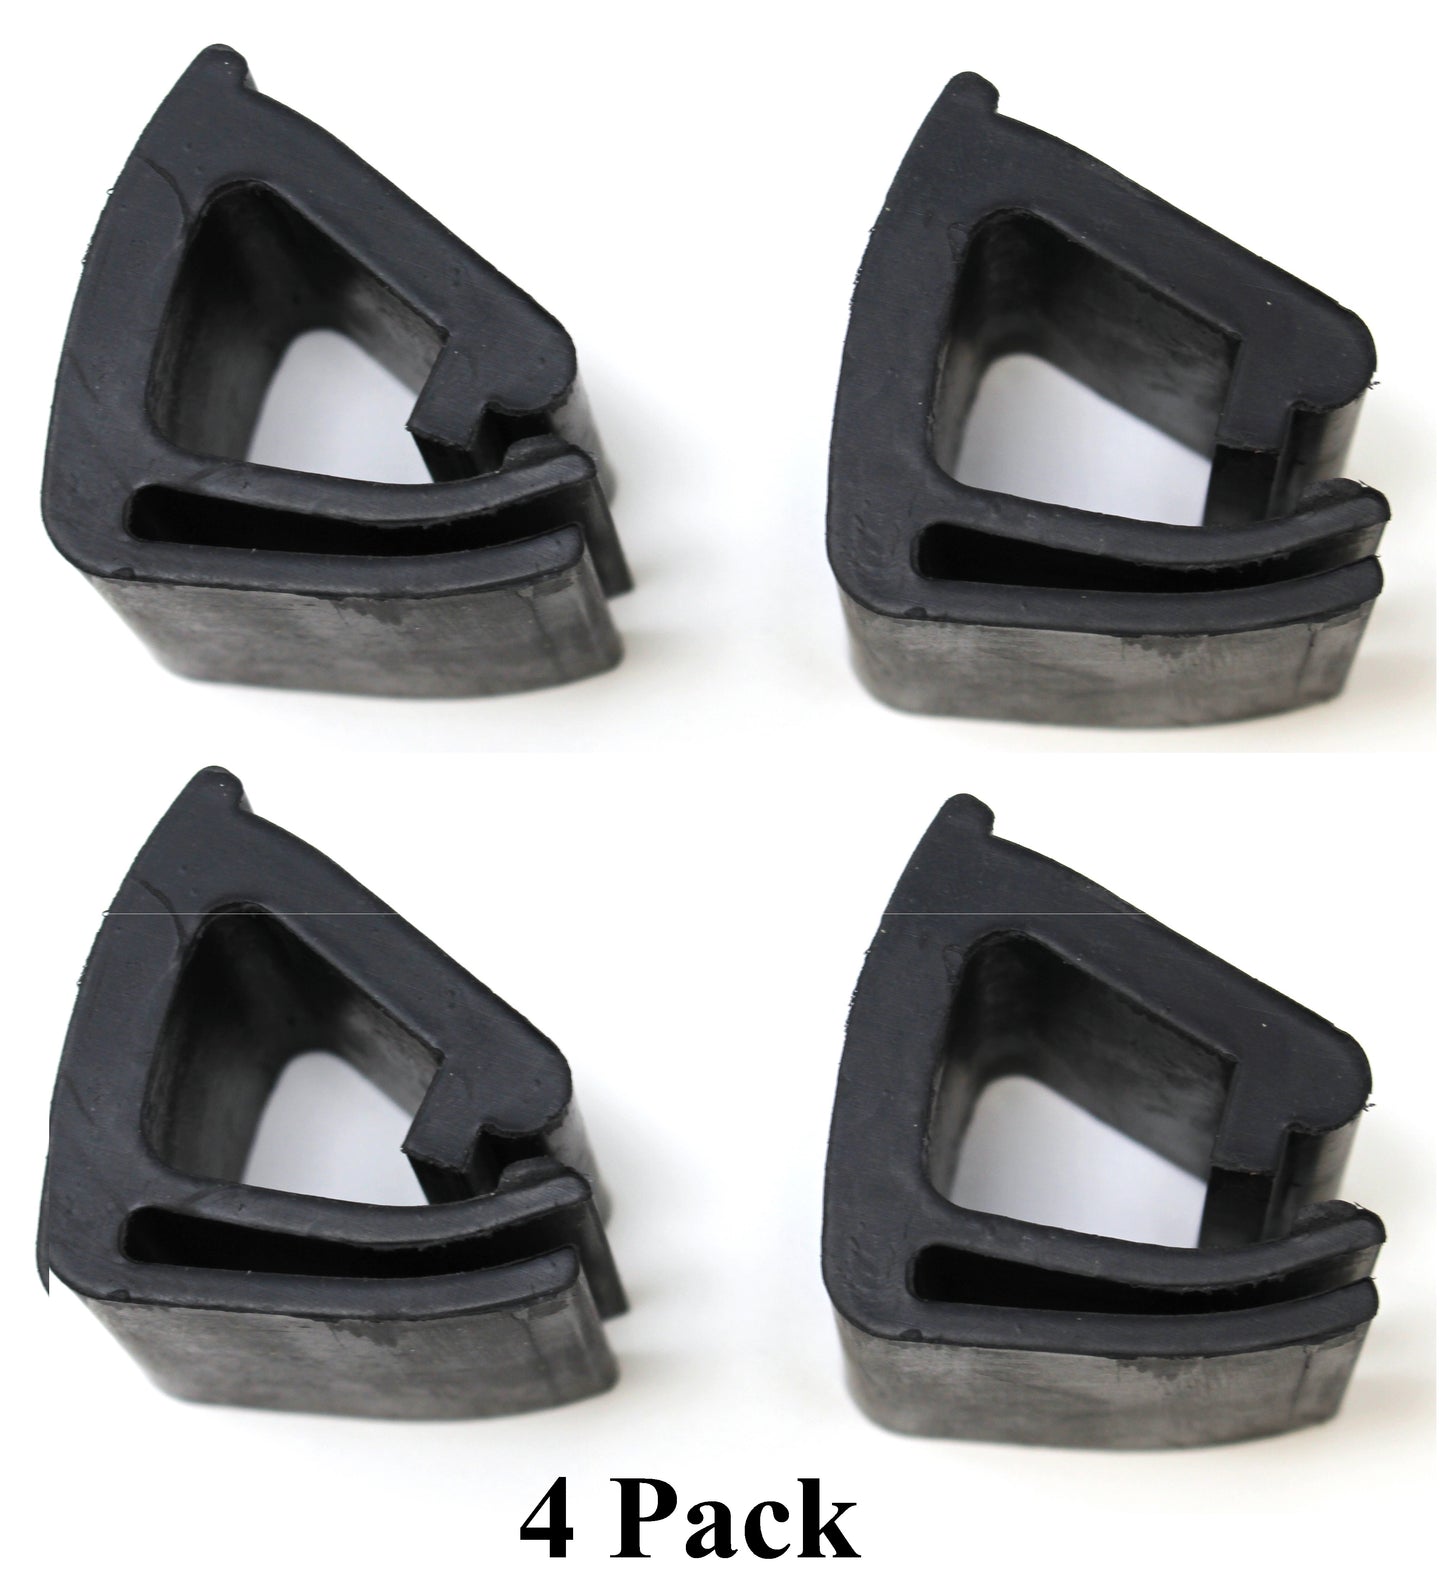 JSP Manufacturing Aftermarket Golf Cart Windshield Retaining Clips EZGO Replaces Club Car 102005801 1020058-01 Yamaha Fit 1"x1" Tube of Golf Carts